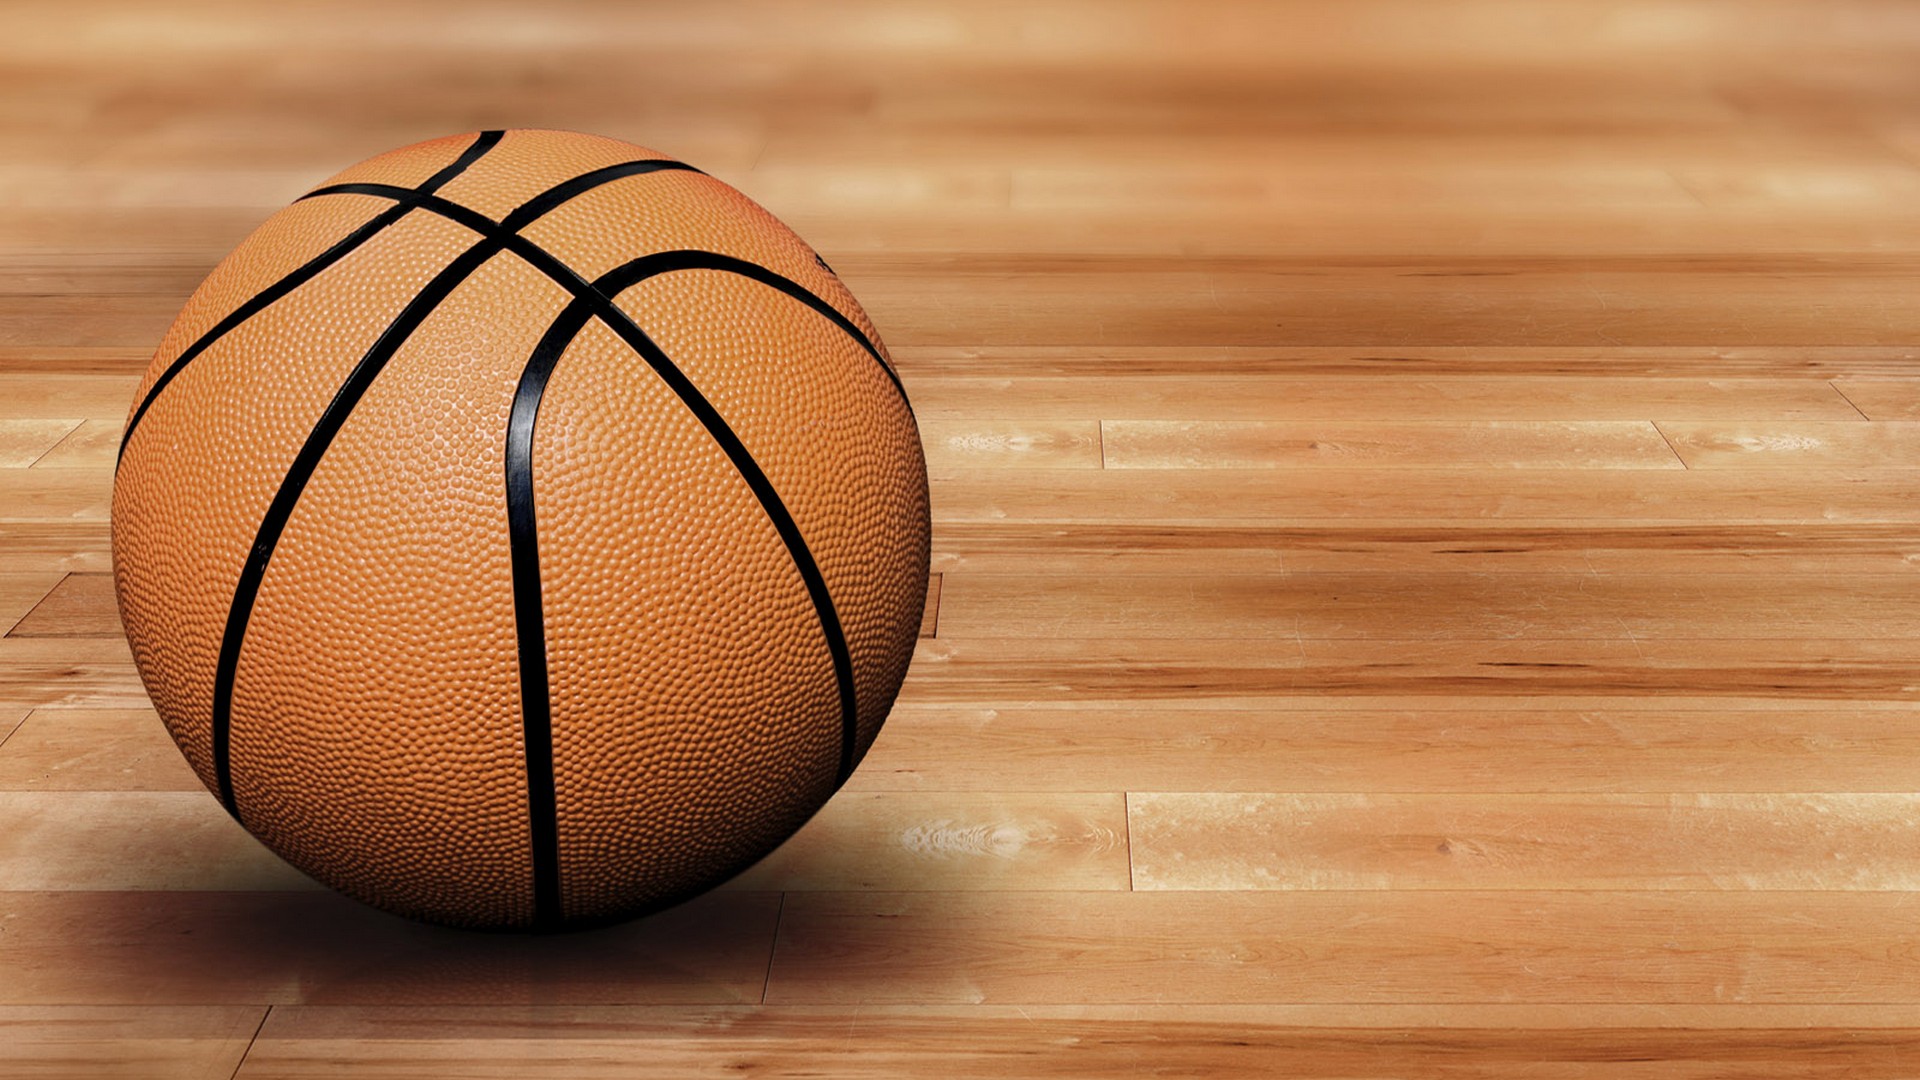 Basketball Games Backgrounds HD with image dimensions 1920x1080 pixel. You can make this wallpaper for your Desktop Computer Backgrounds, Windows or Mac Screensavers, iPhone Lock screen, Tablet or Android and another Mobile Phone device